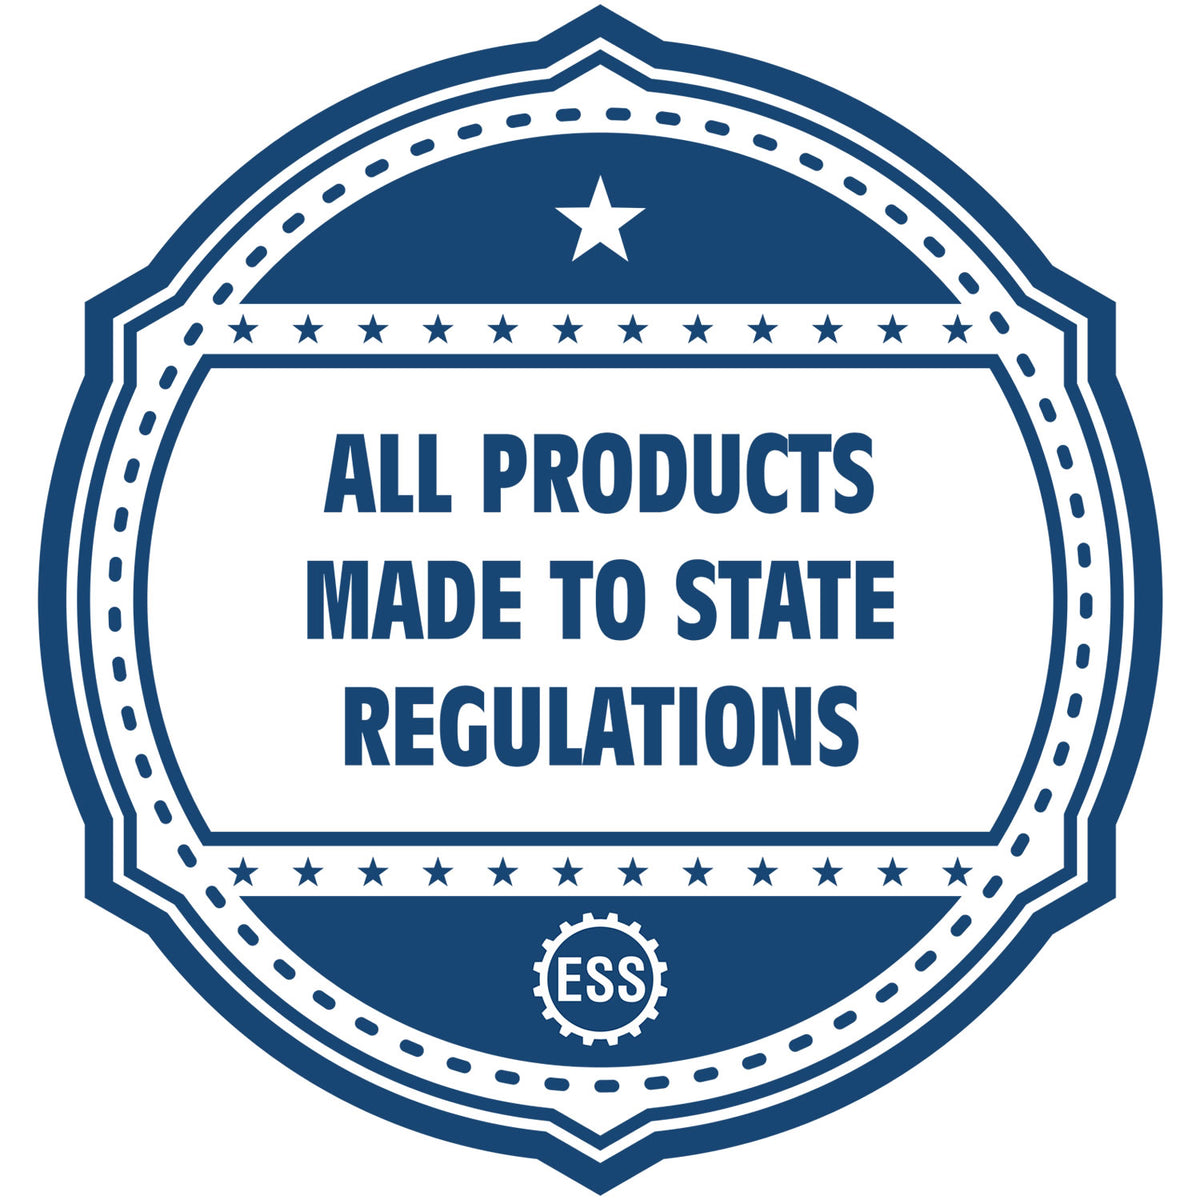 An icon or badge element for the Self-Inking Rectangular Florida Notary Stamp showing that this product is made in compliance with state regulations.